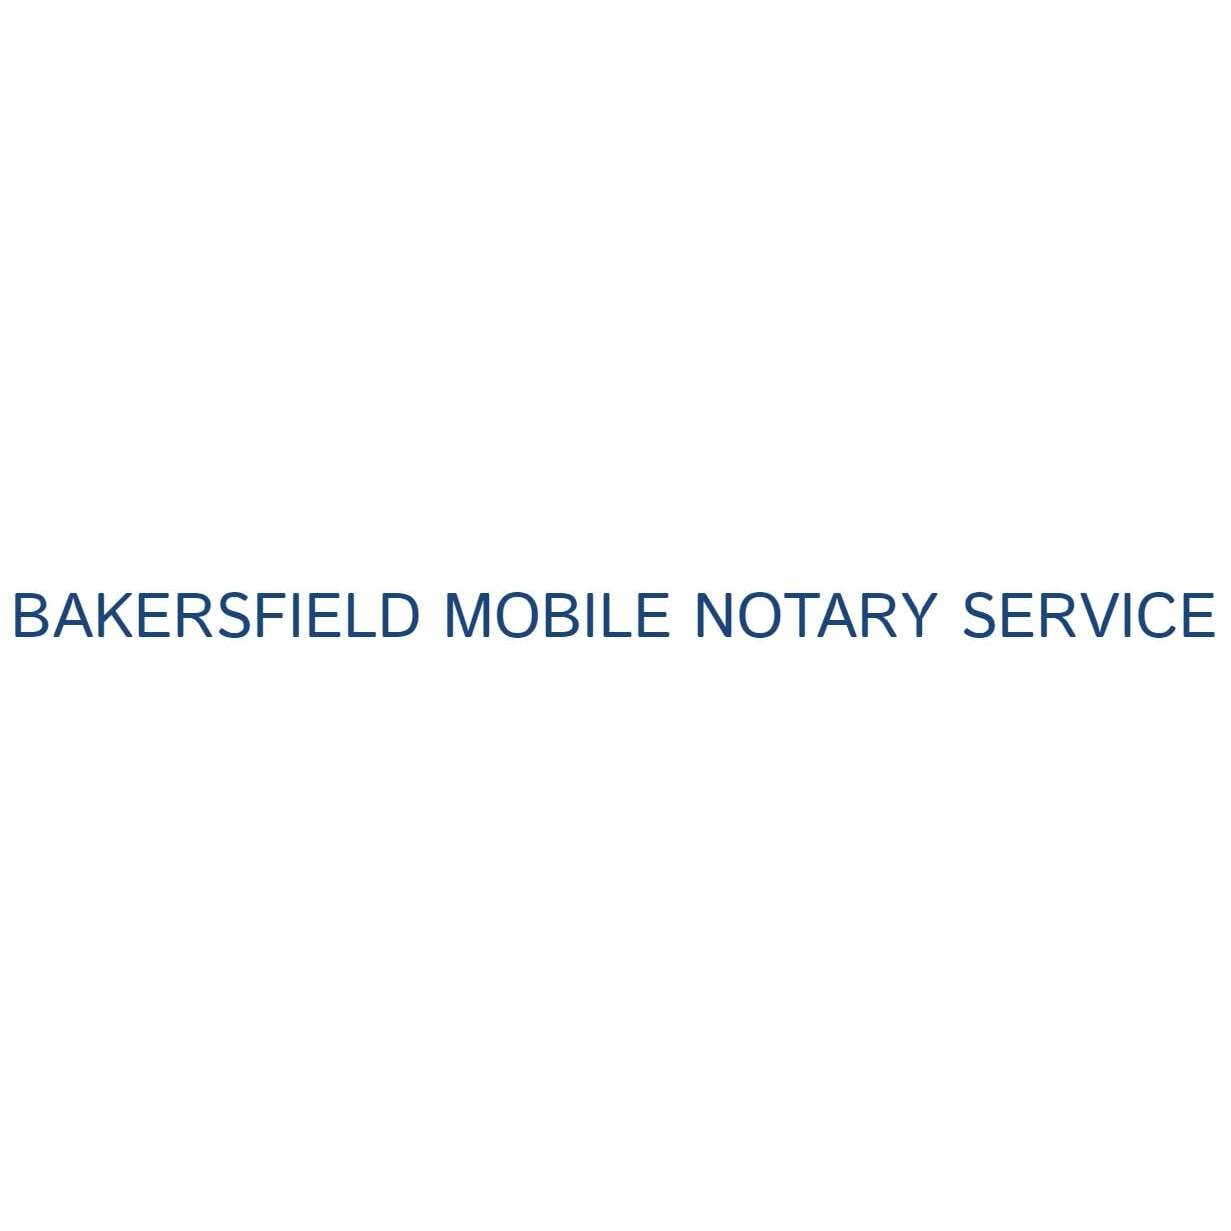 Bakersfield Mobile Notary Service Logo